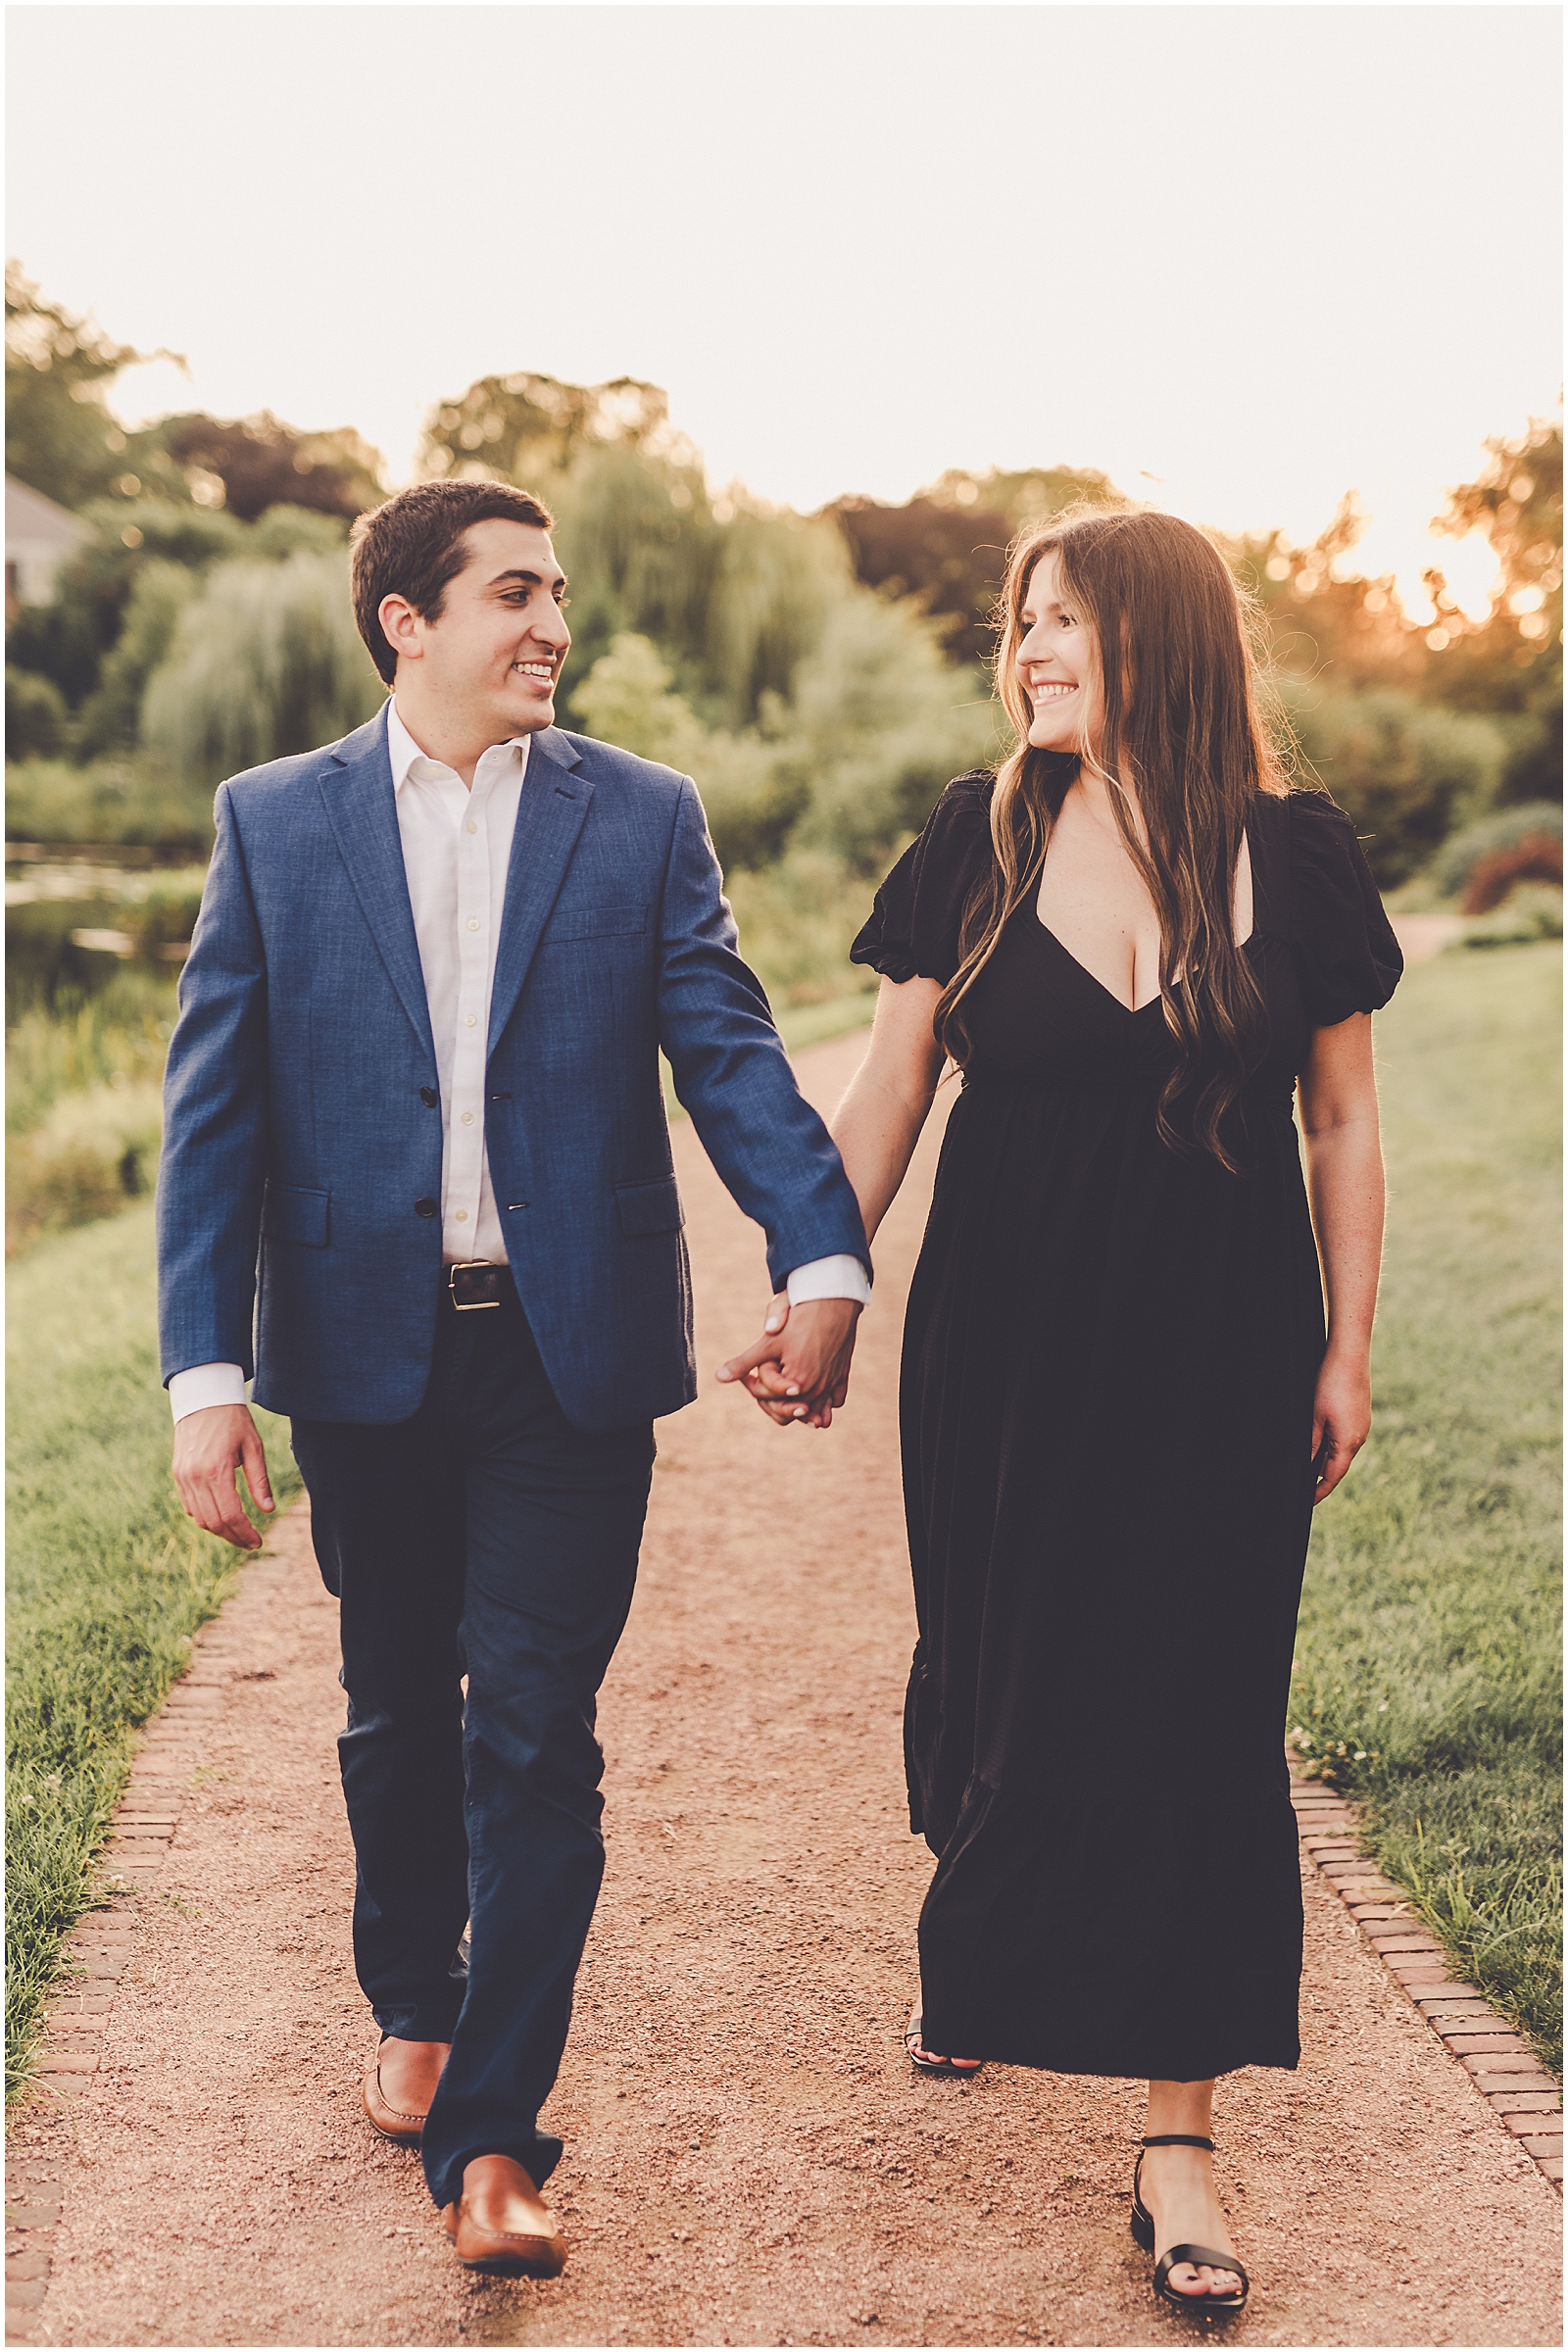 Lauren & Kyle's Cantigny Park engagement session in Wheaton with Chicagoland wedding photographer Kara Evans Photographer.